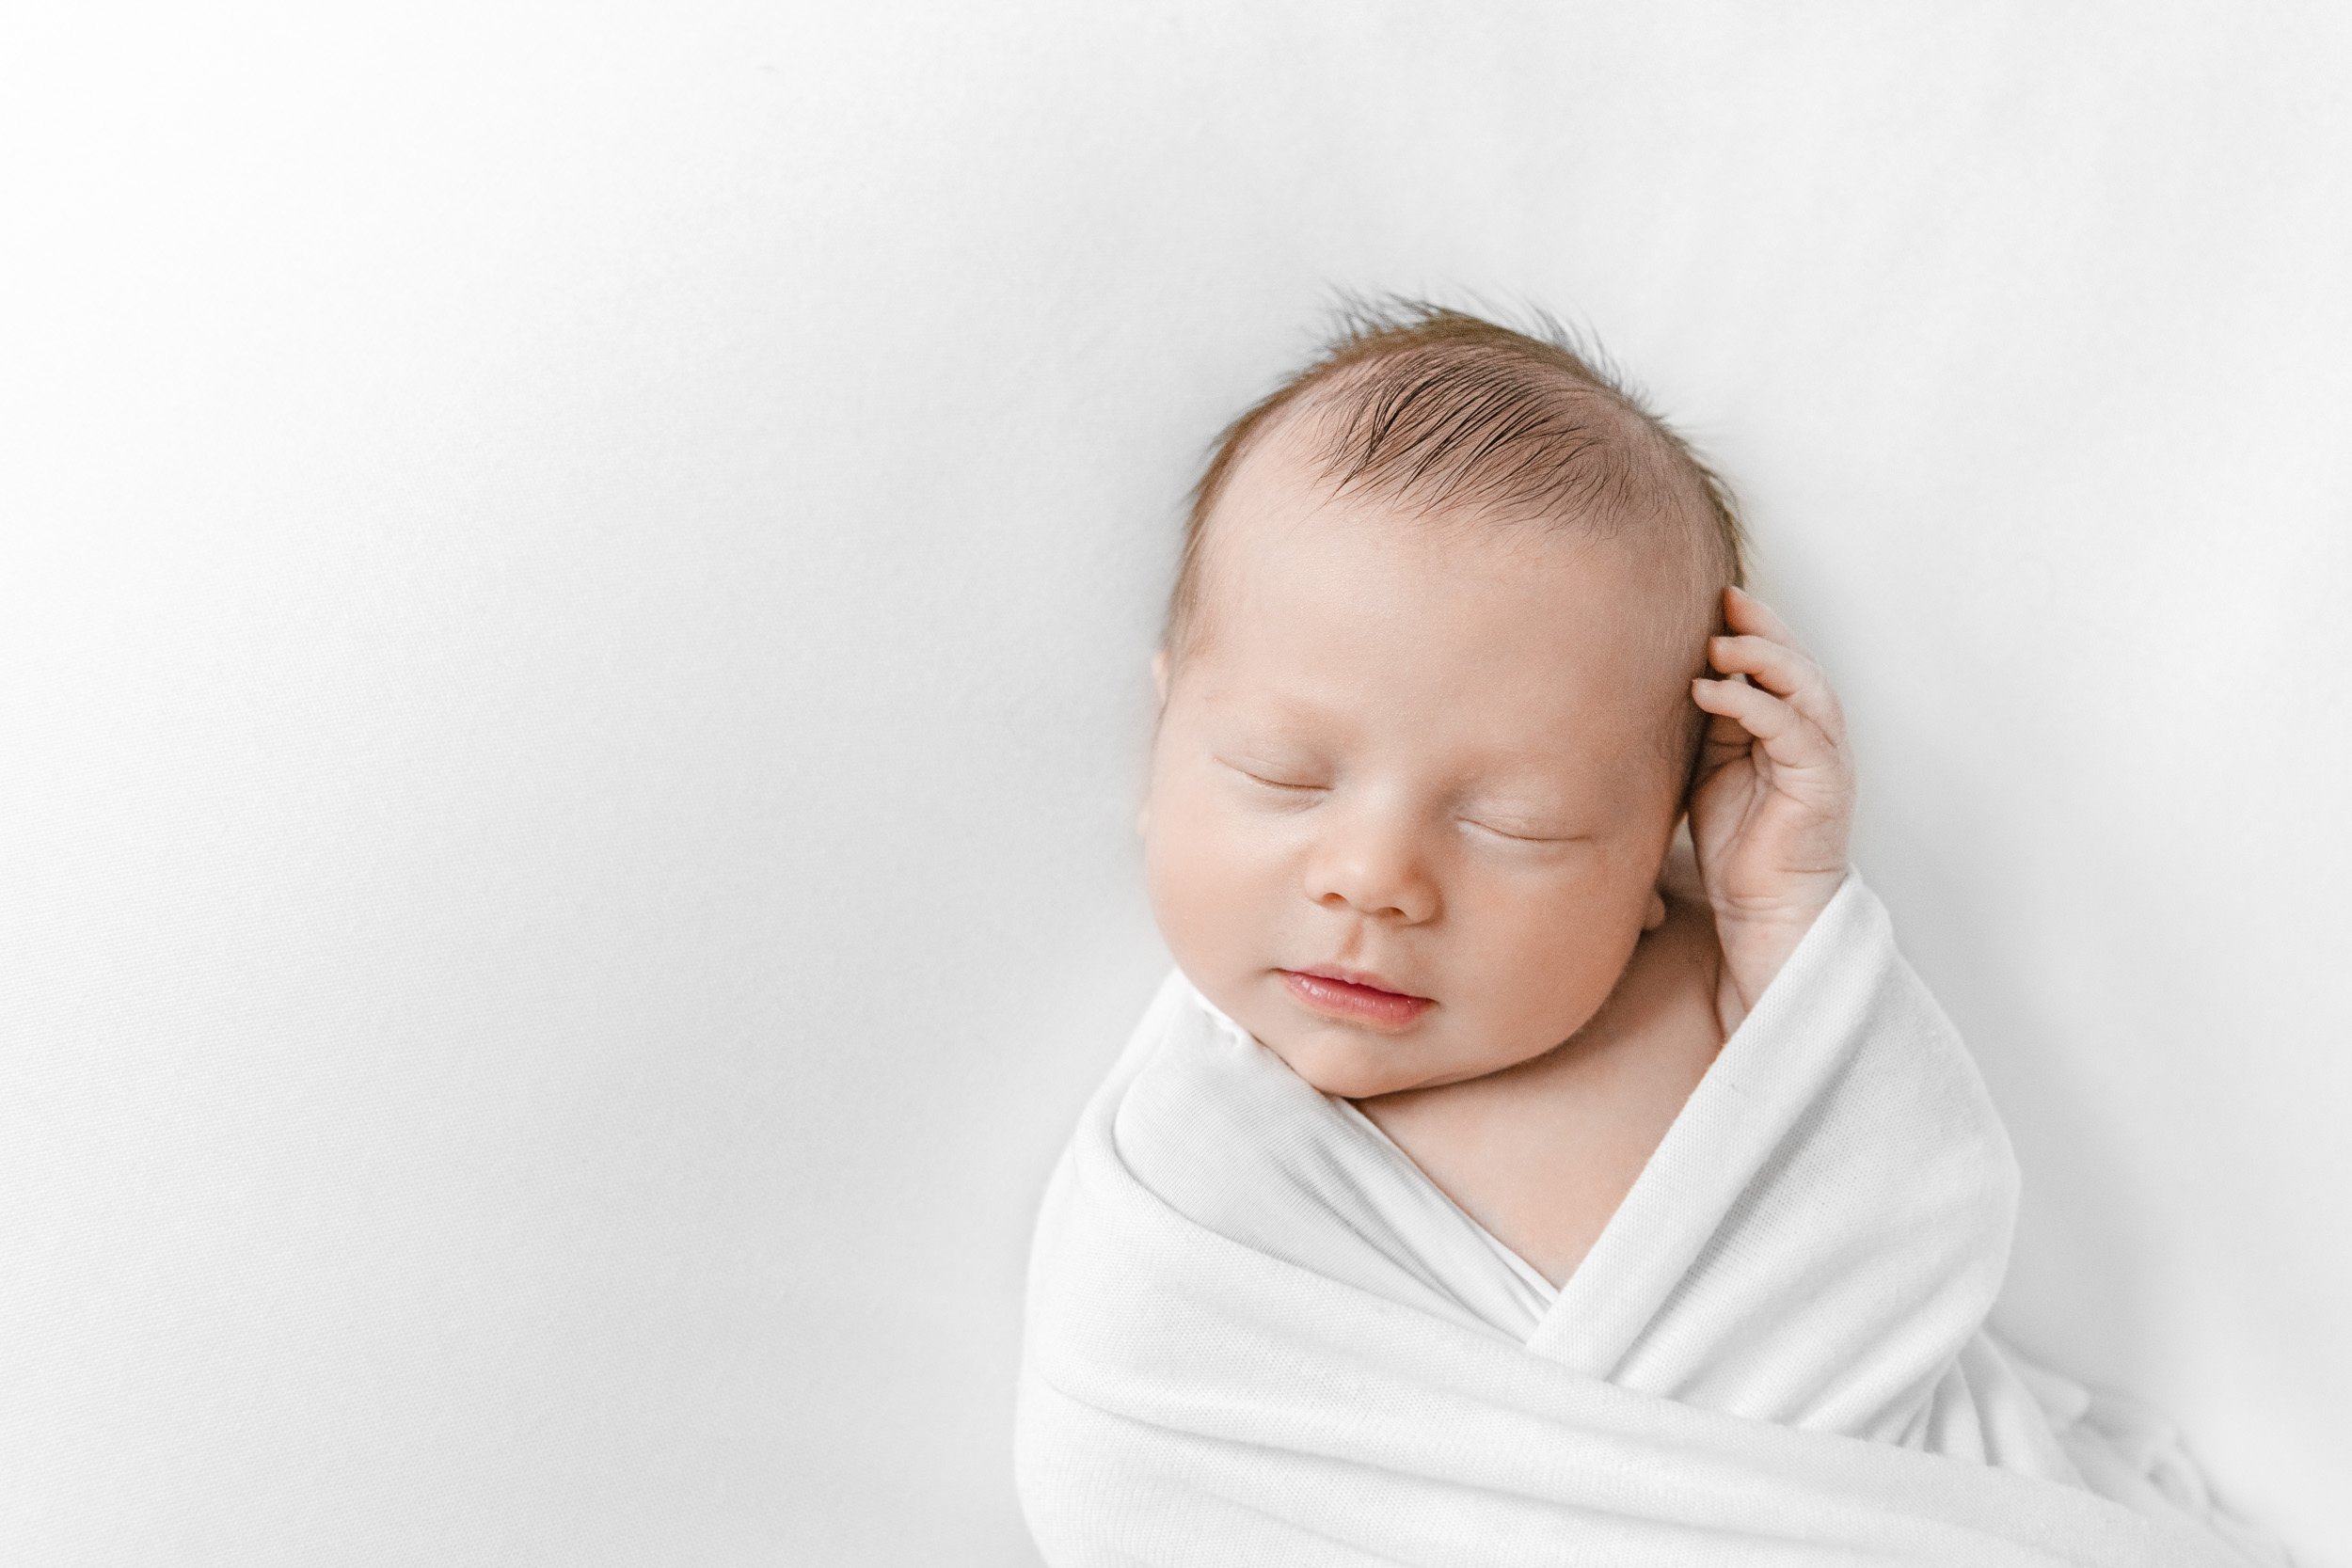  Newborn baby swaddled in a white blanket in a New Jersey home by Nicole Hawkins Photography. sleeping baby boy white swaddle #NewbornSession #NJfamilyphotographer #Inhomebabyphotography #newborn #NicoleHawkinsPhotography #NicoleHawkinsNewborns 